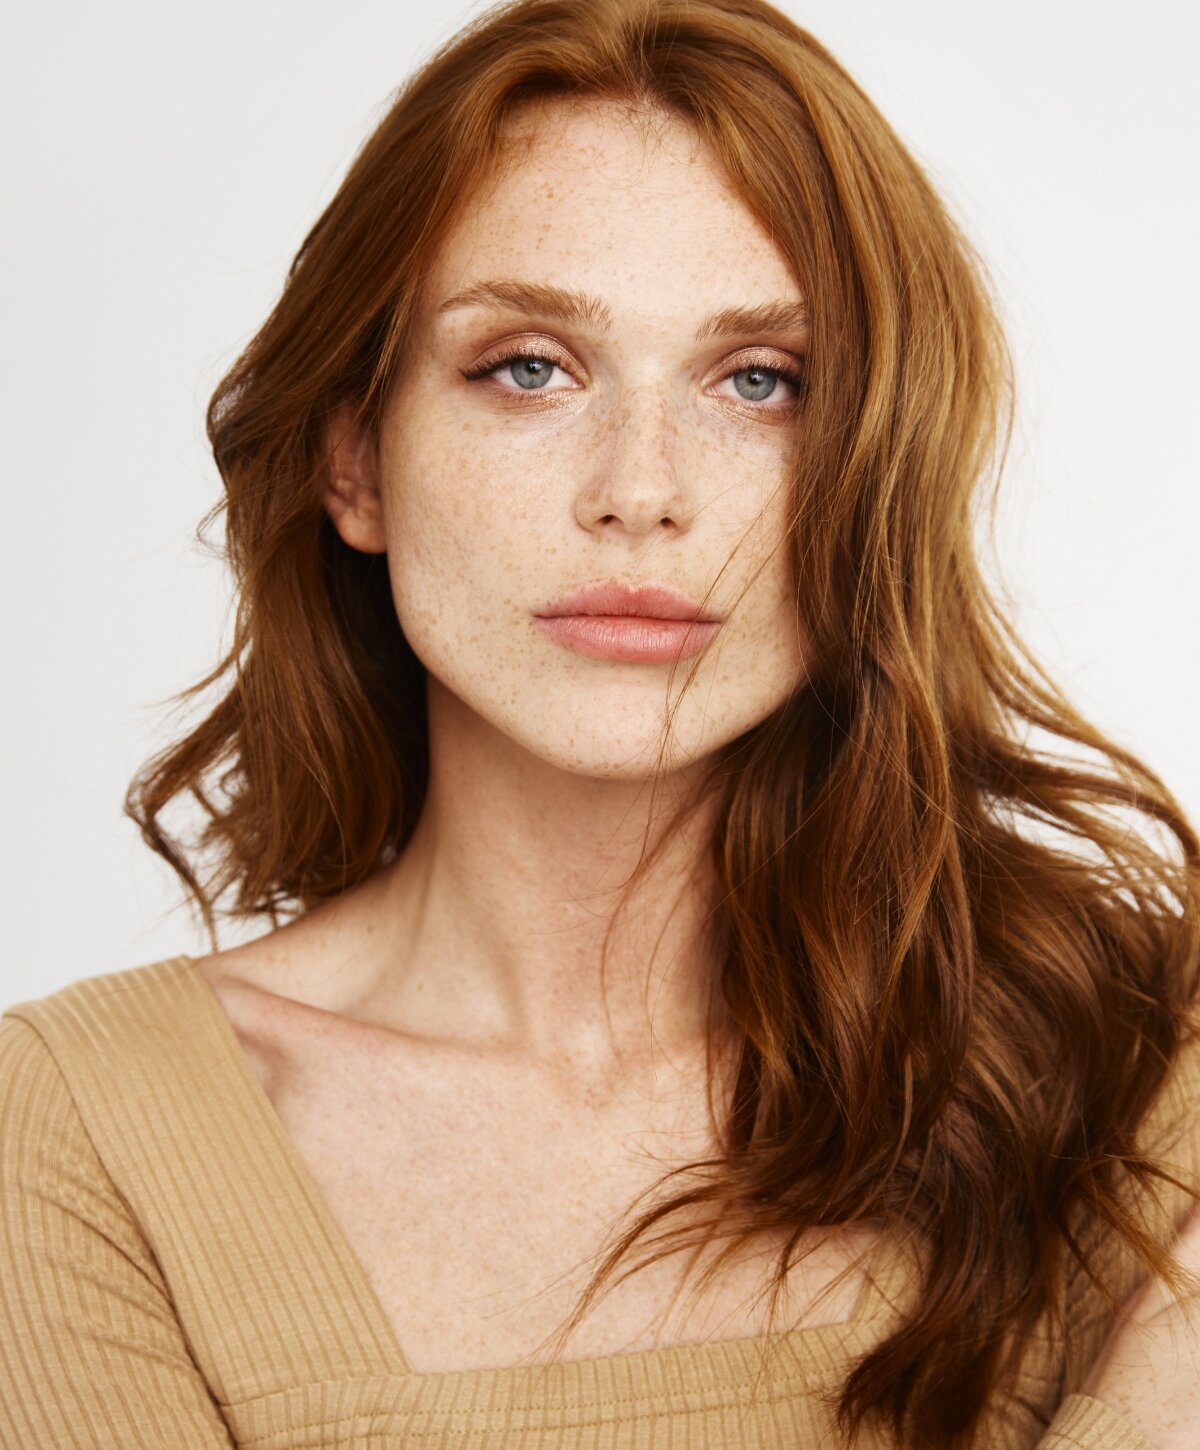 McKinney chemical peel model with red hair